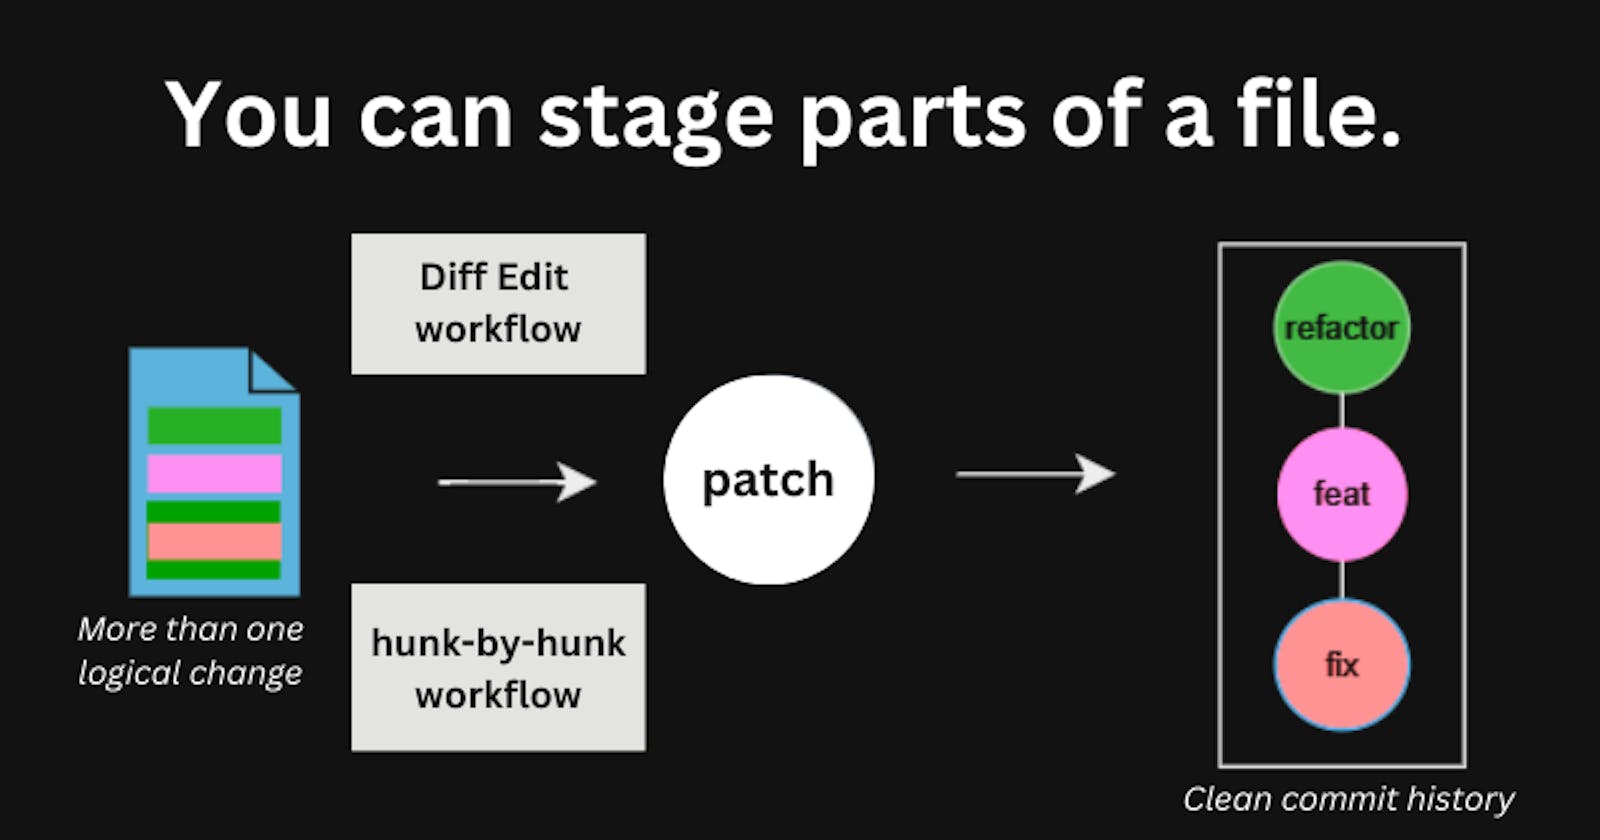 You can stage parts of a file.